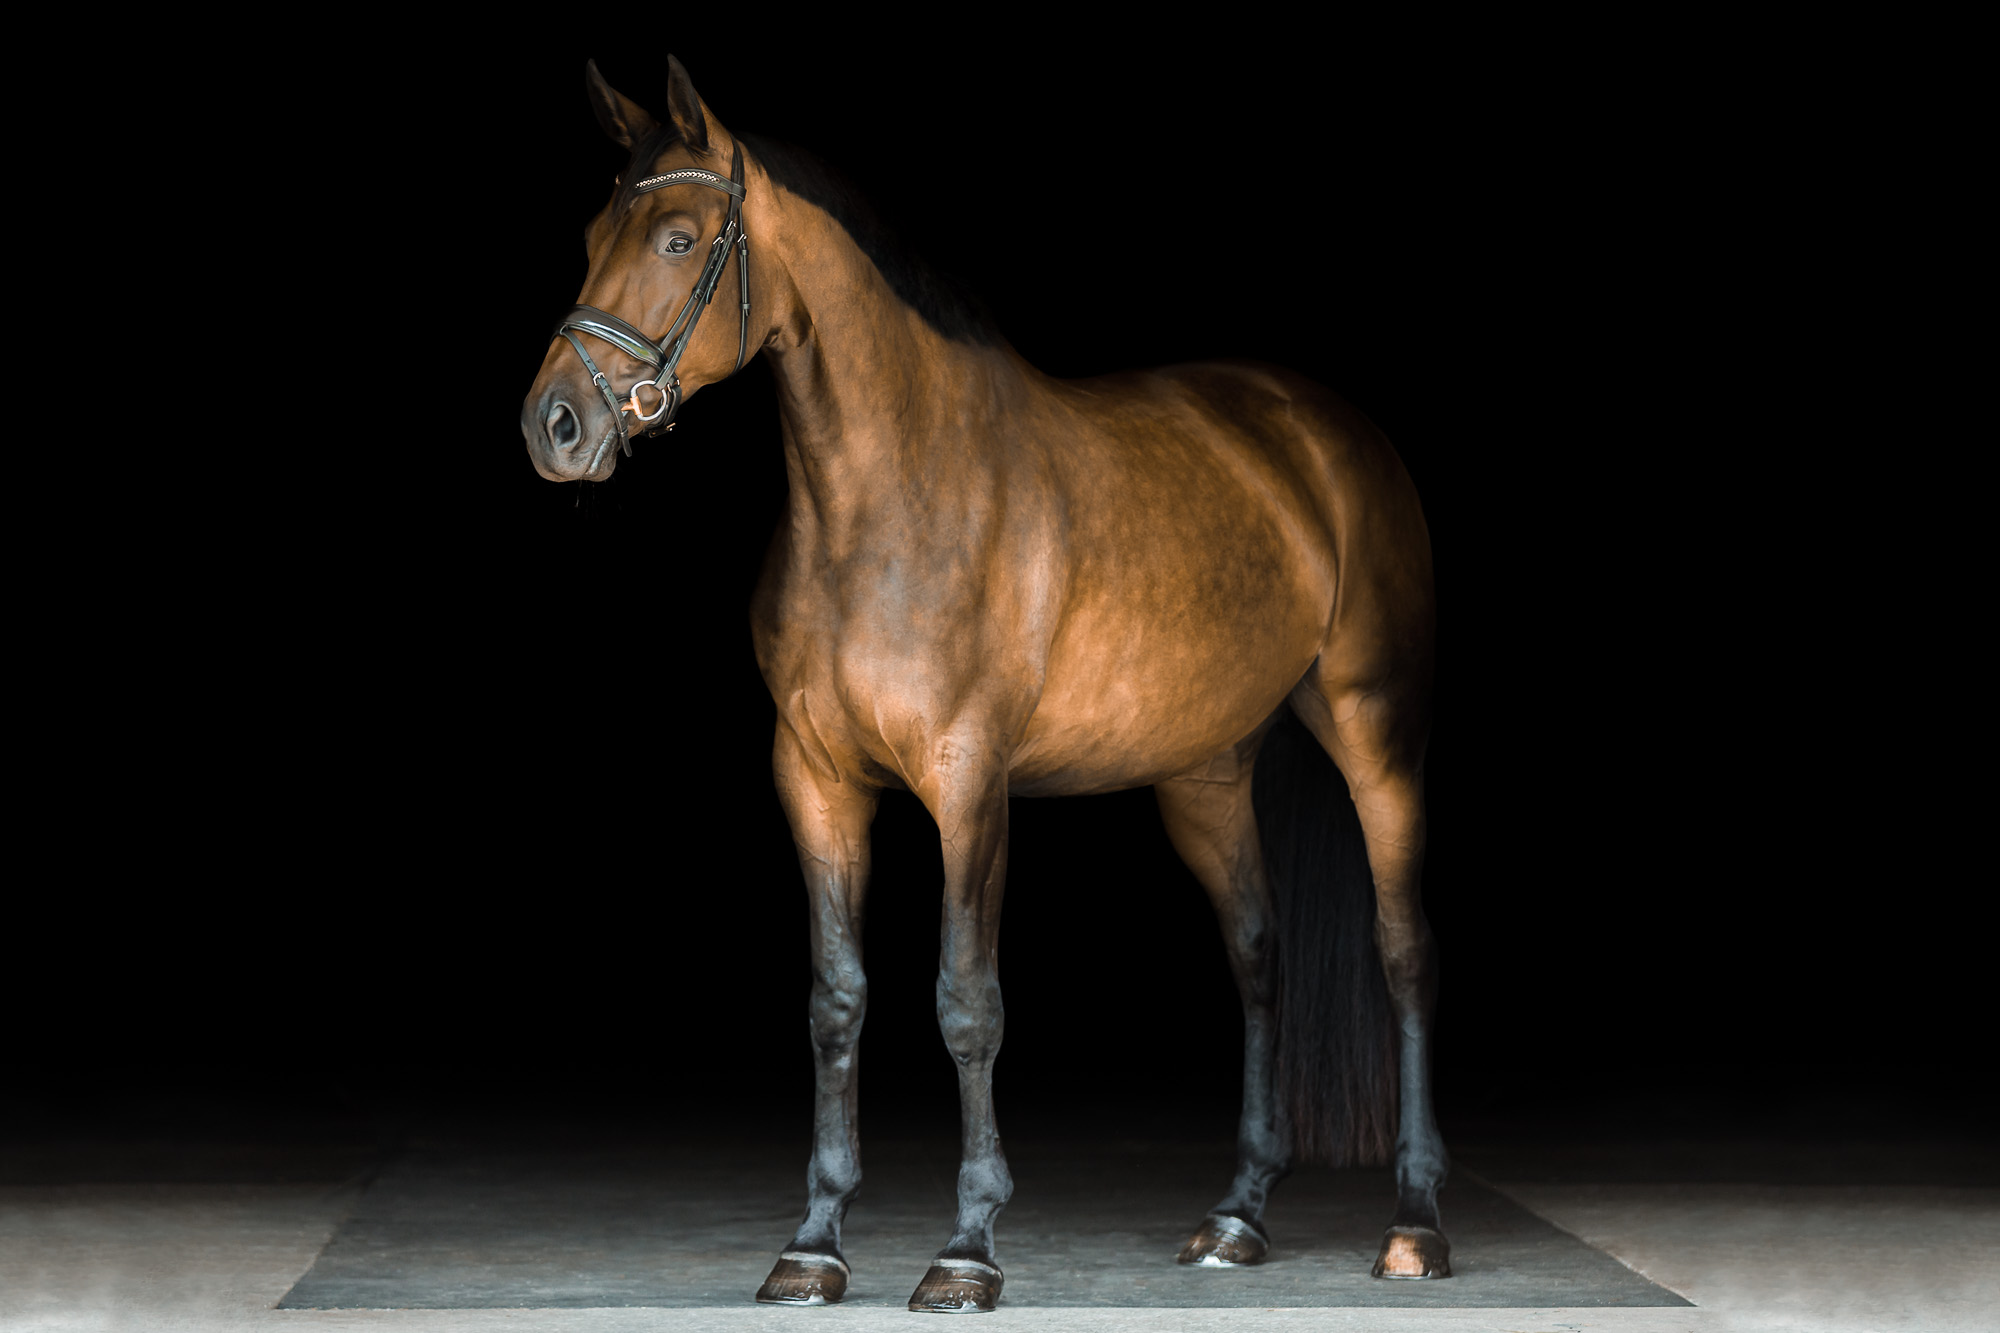 dapple bay mare on black background at Red Tail Farm